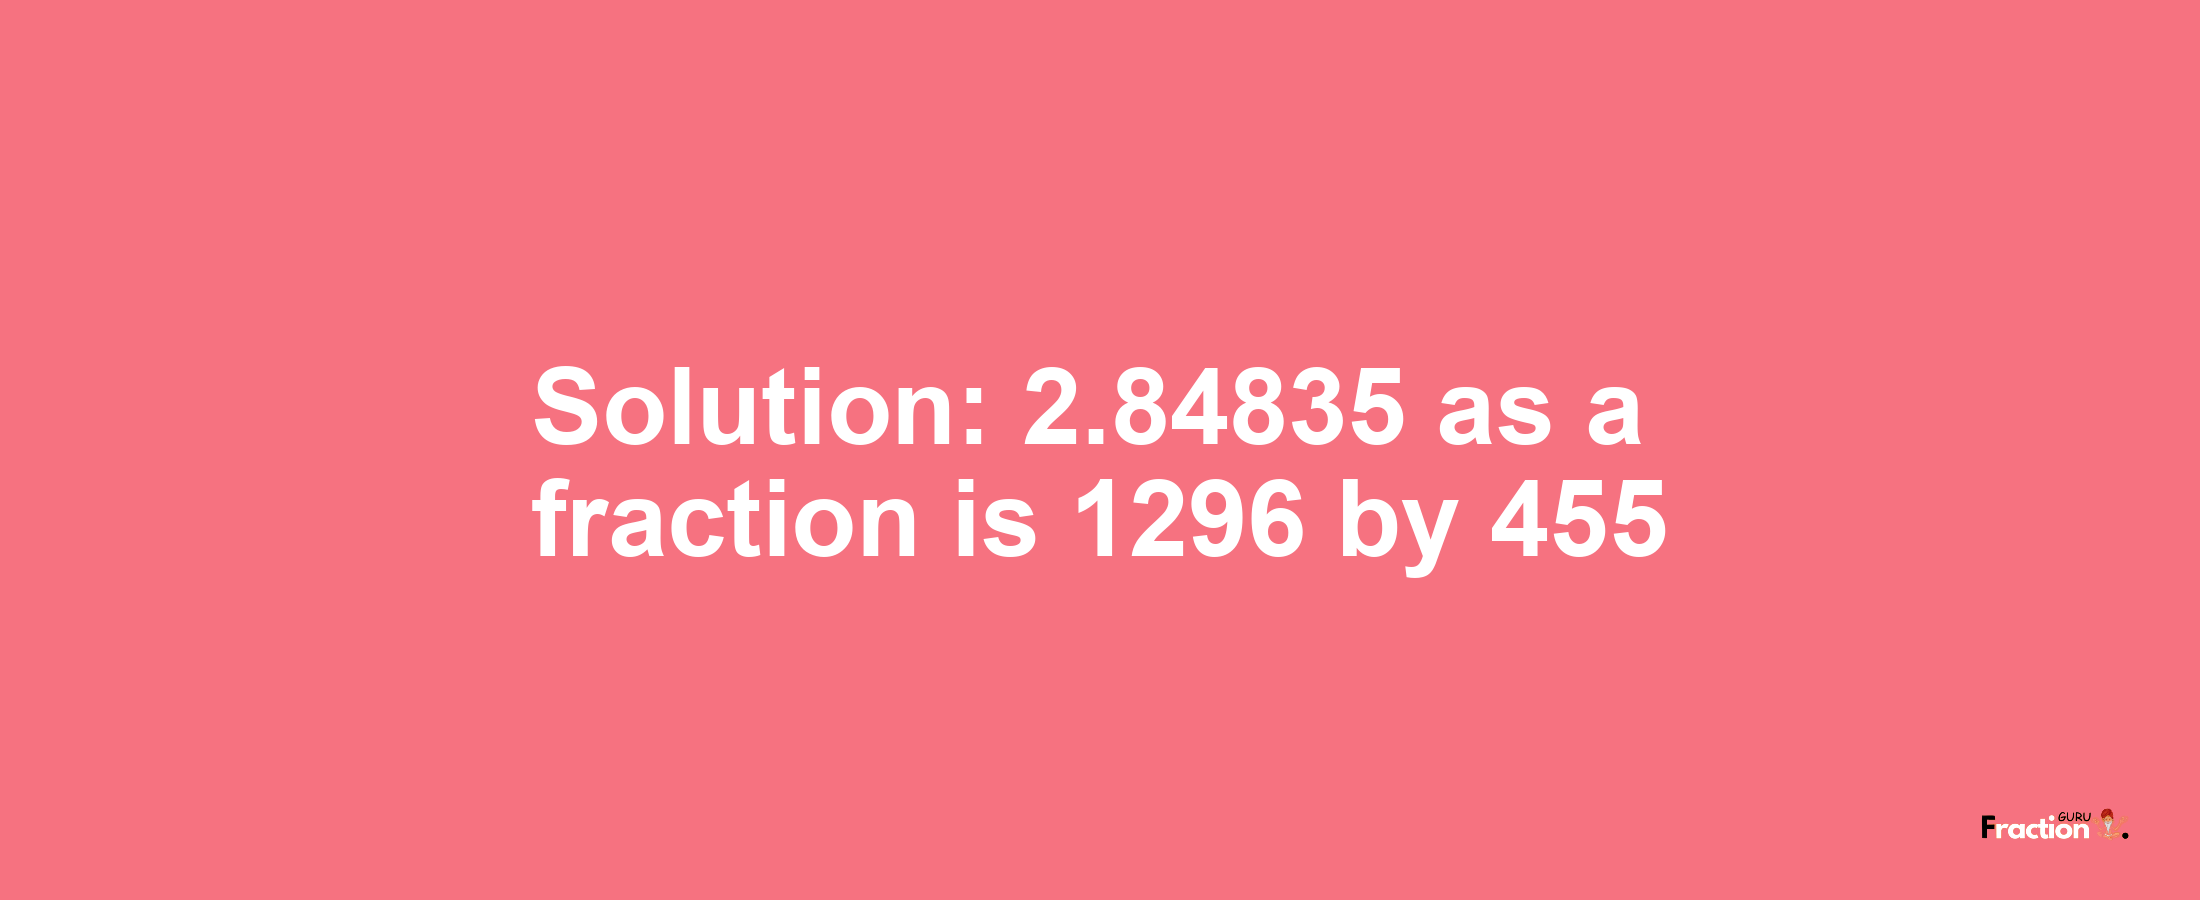 Solution:2.84835 as a fraction is 1296/455